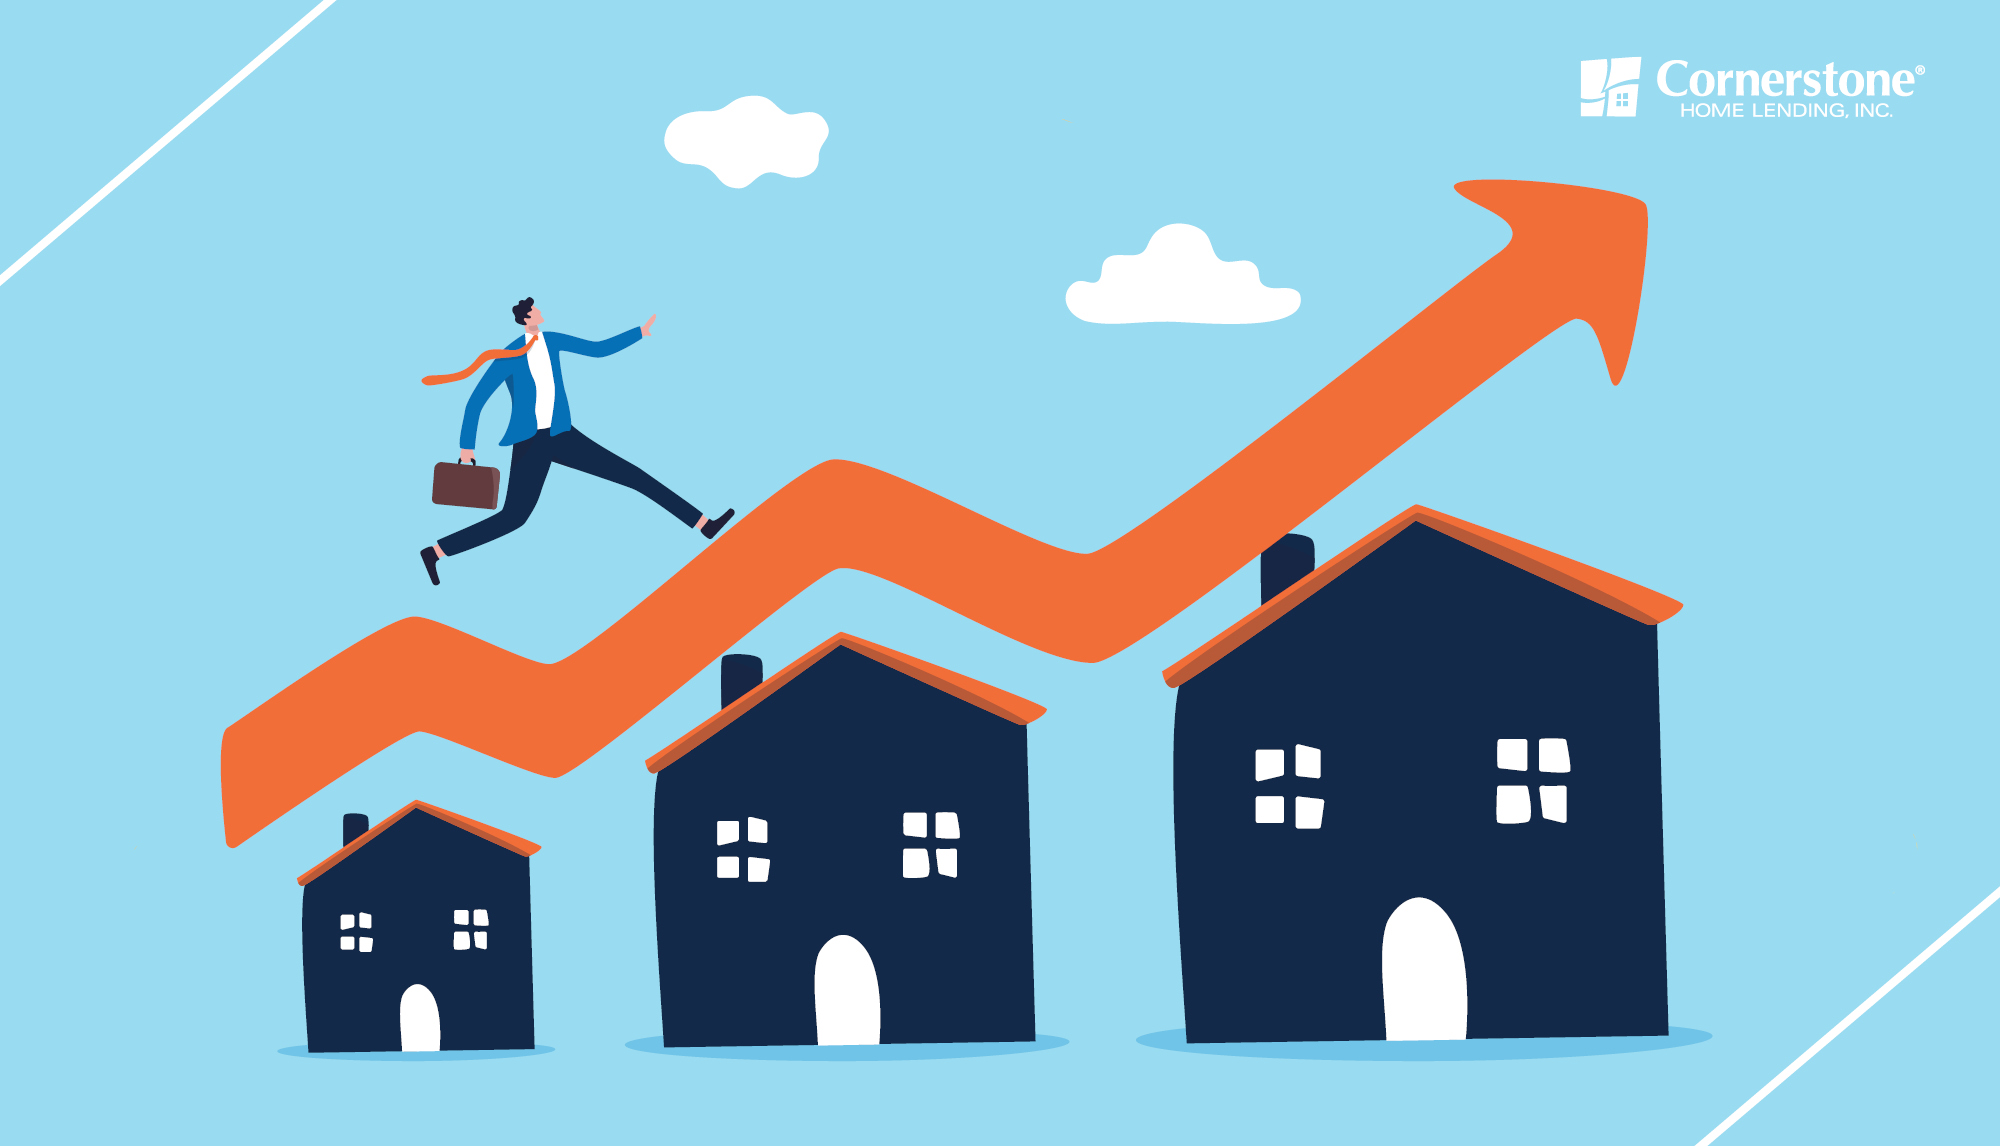 Exactly what’s going on in today’s housing market, explained by 4 trends